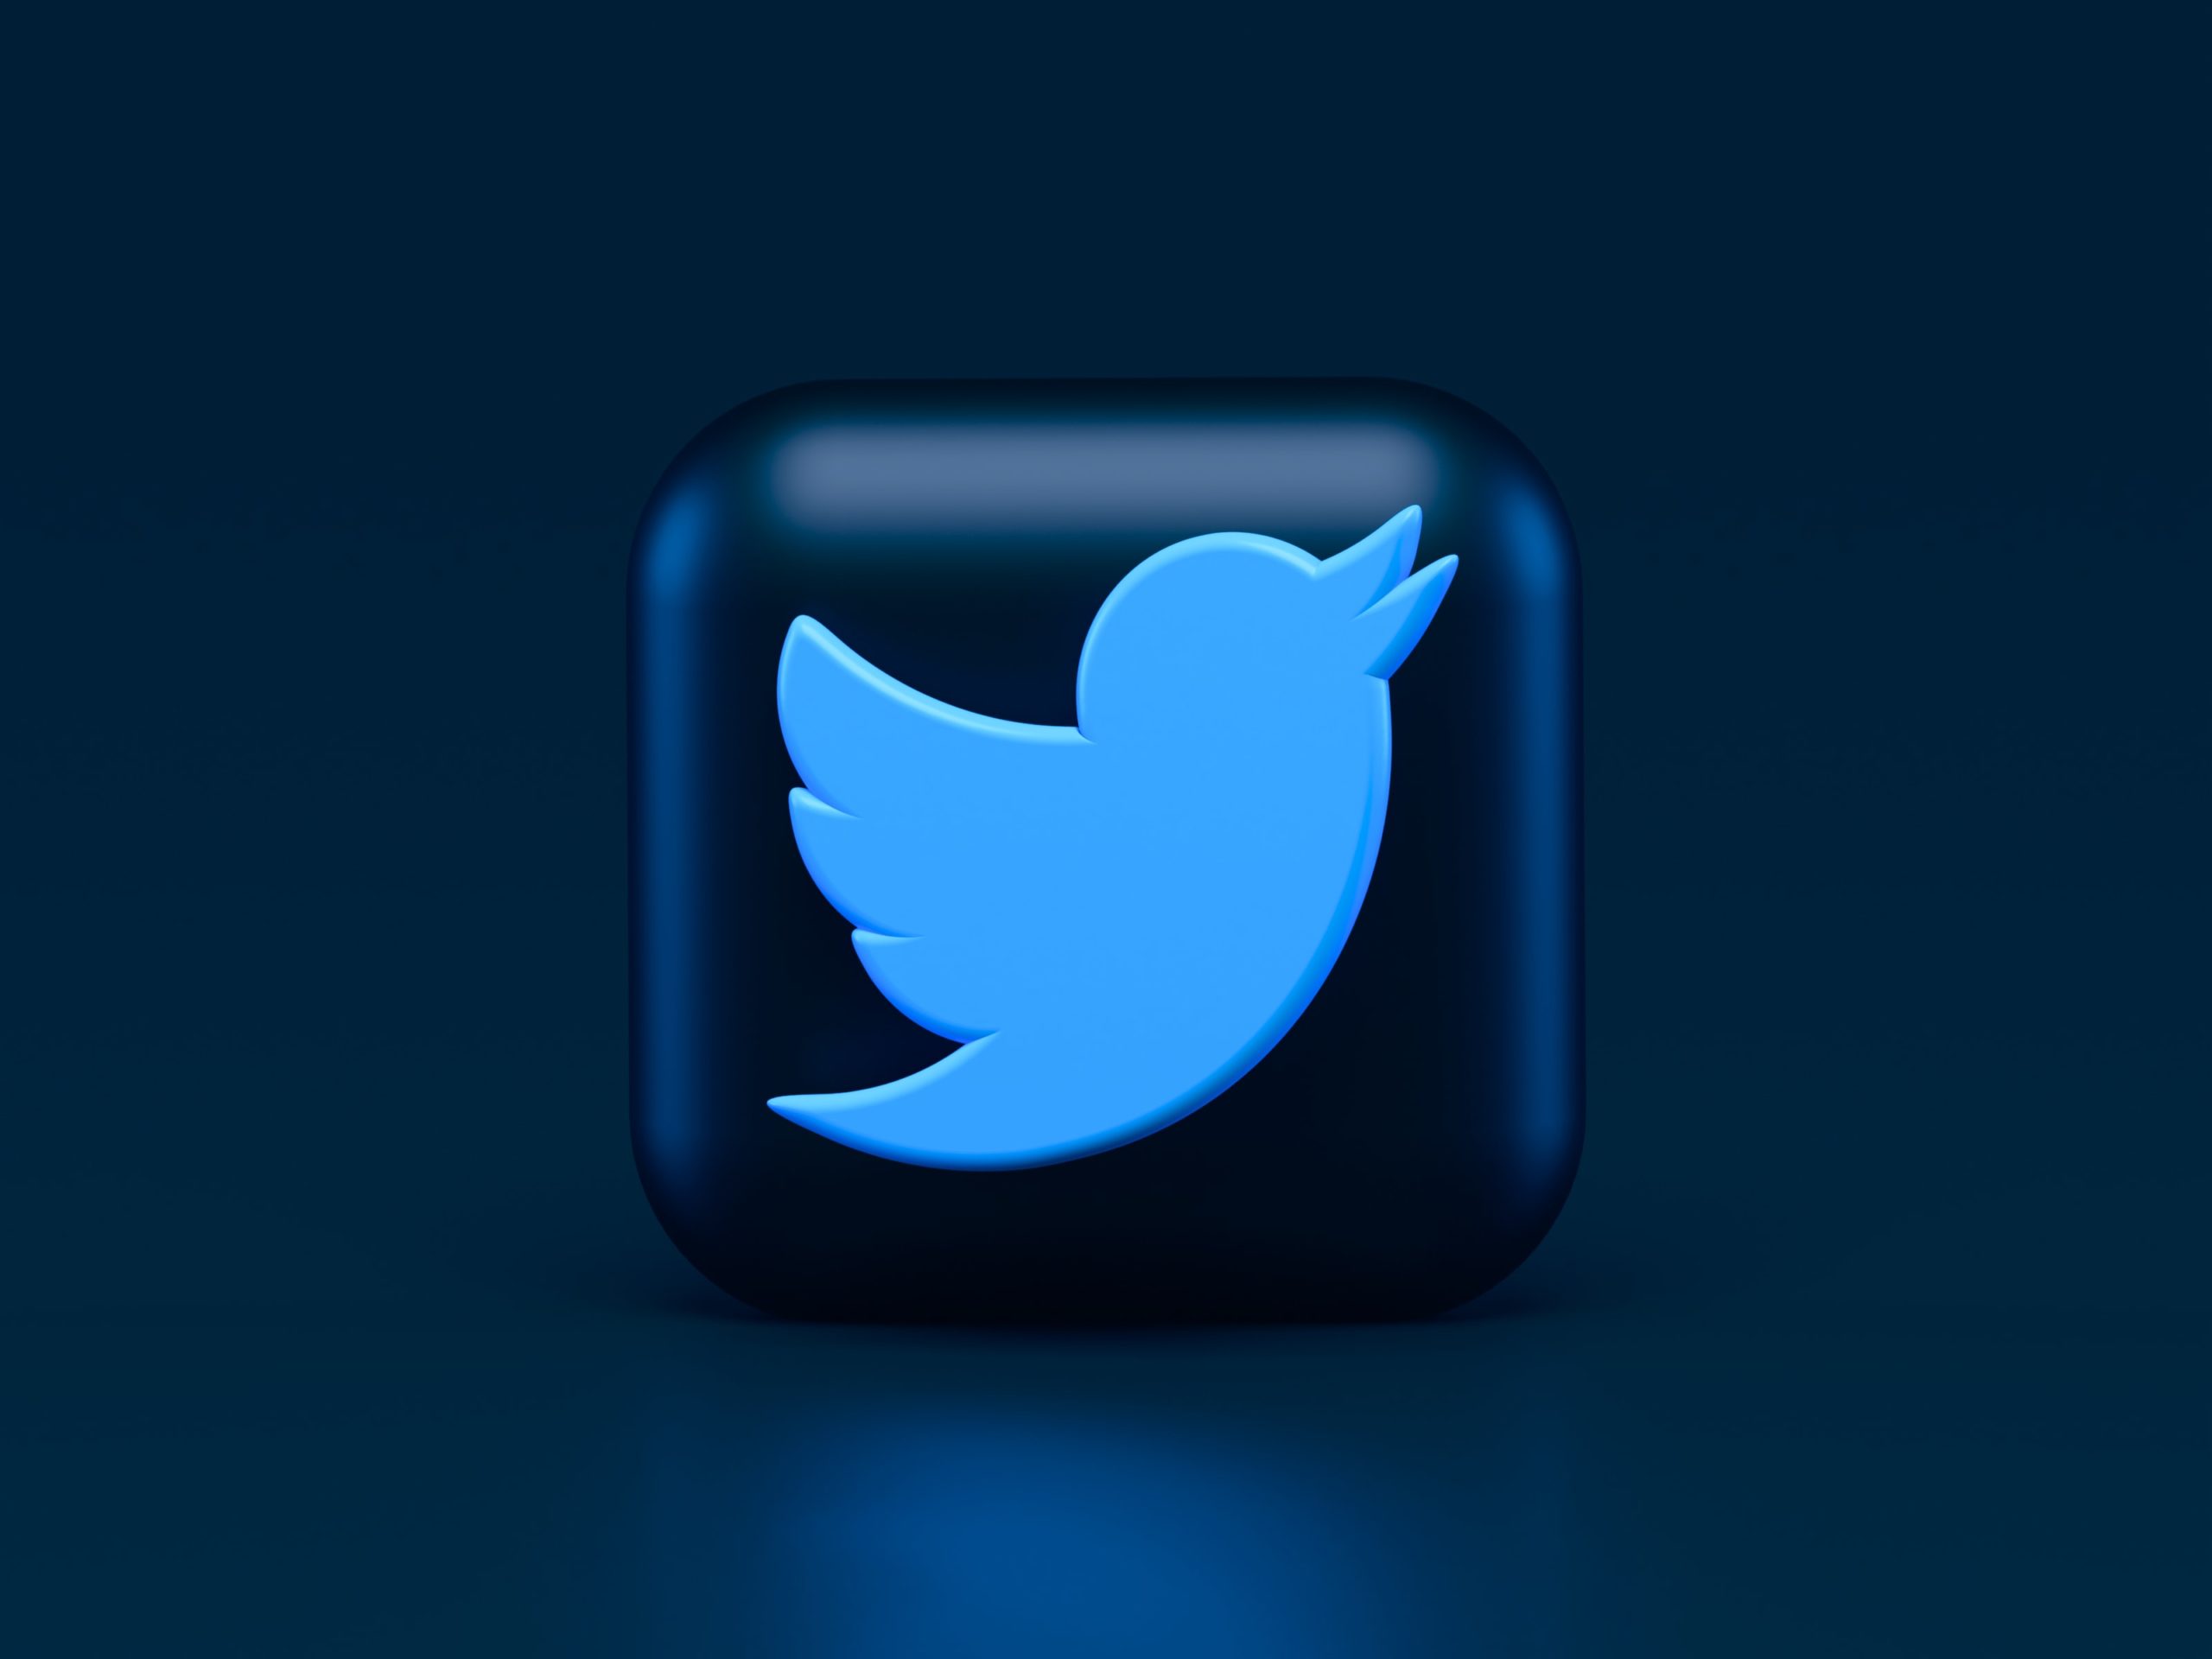 A version of the Twitter icon (a bright blue bird on a darker blue square)